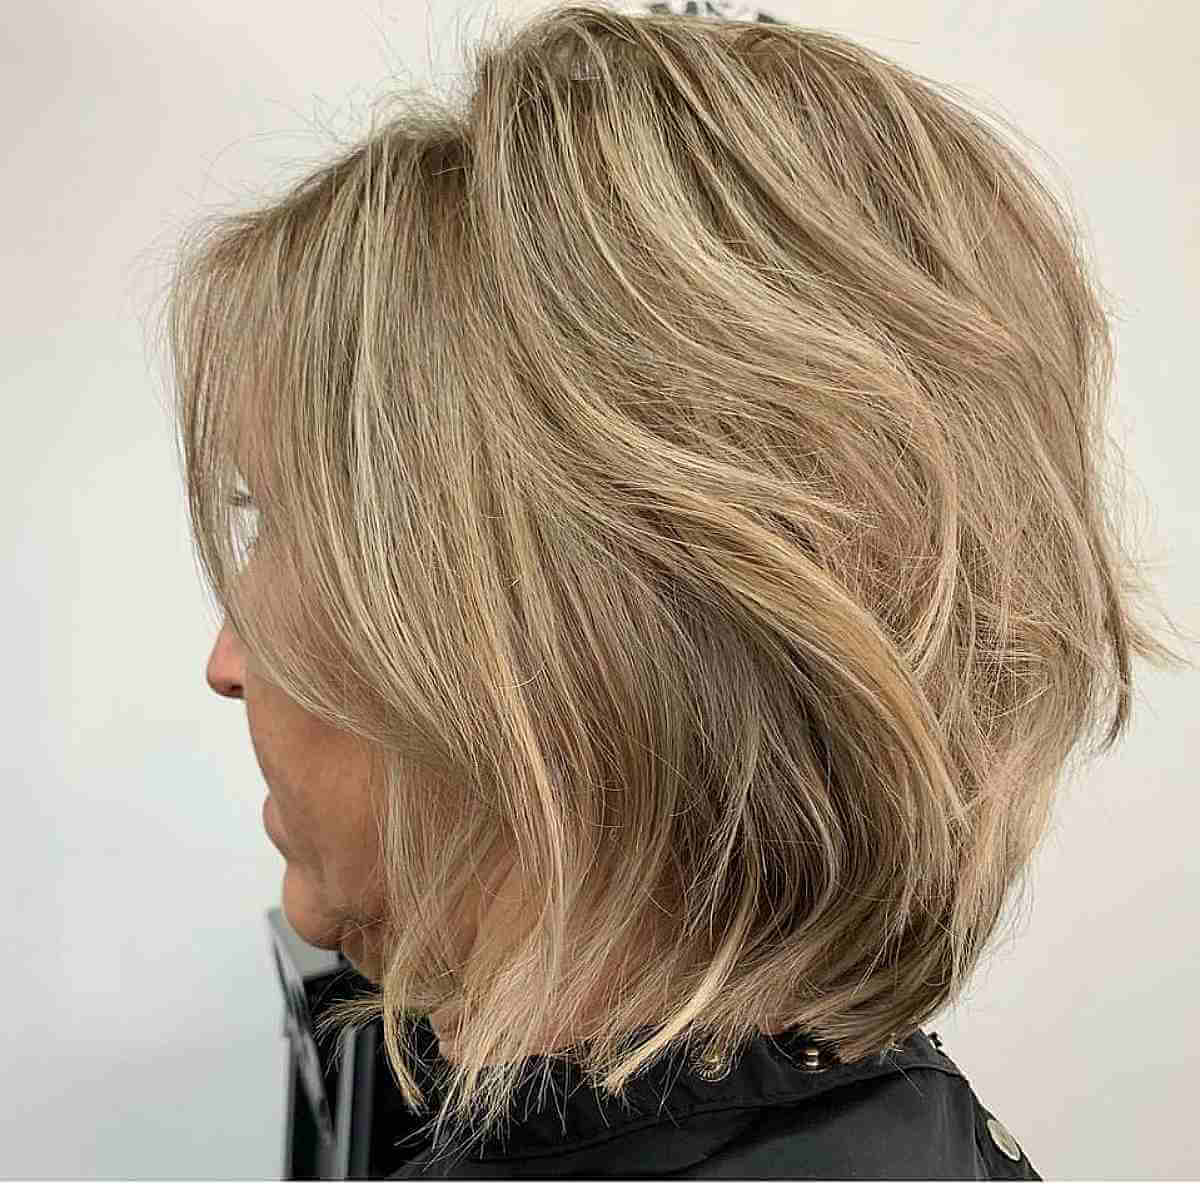 Short to Medium Textured Cut on Blonde Hair for an Old Lady